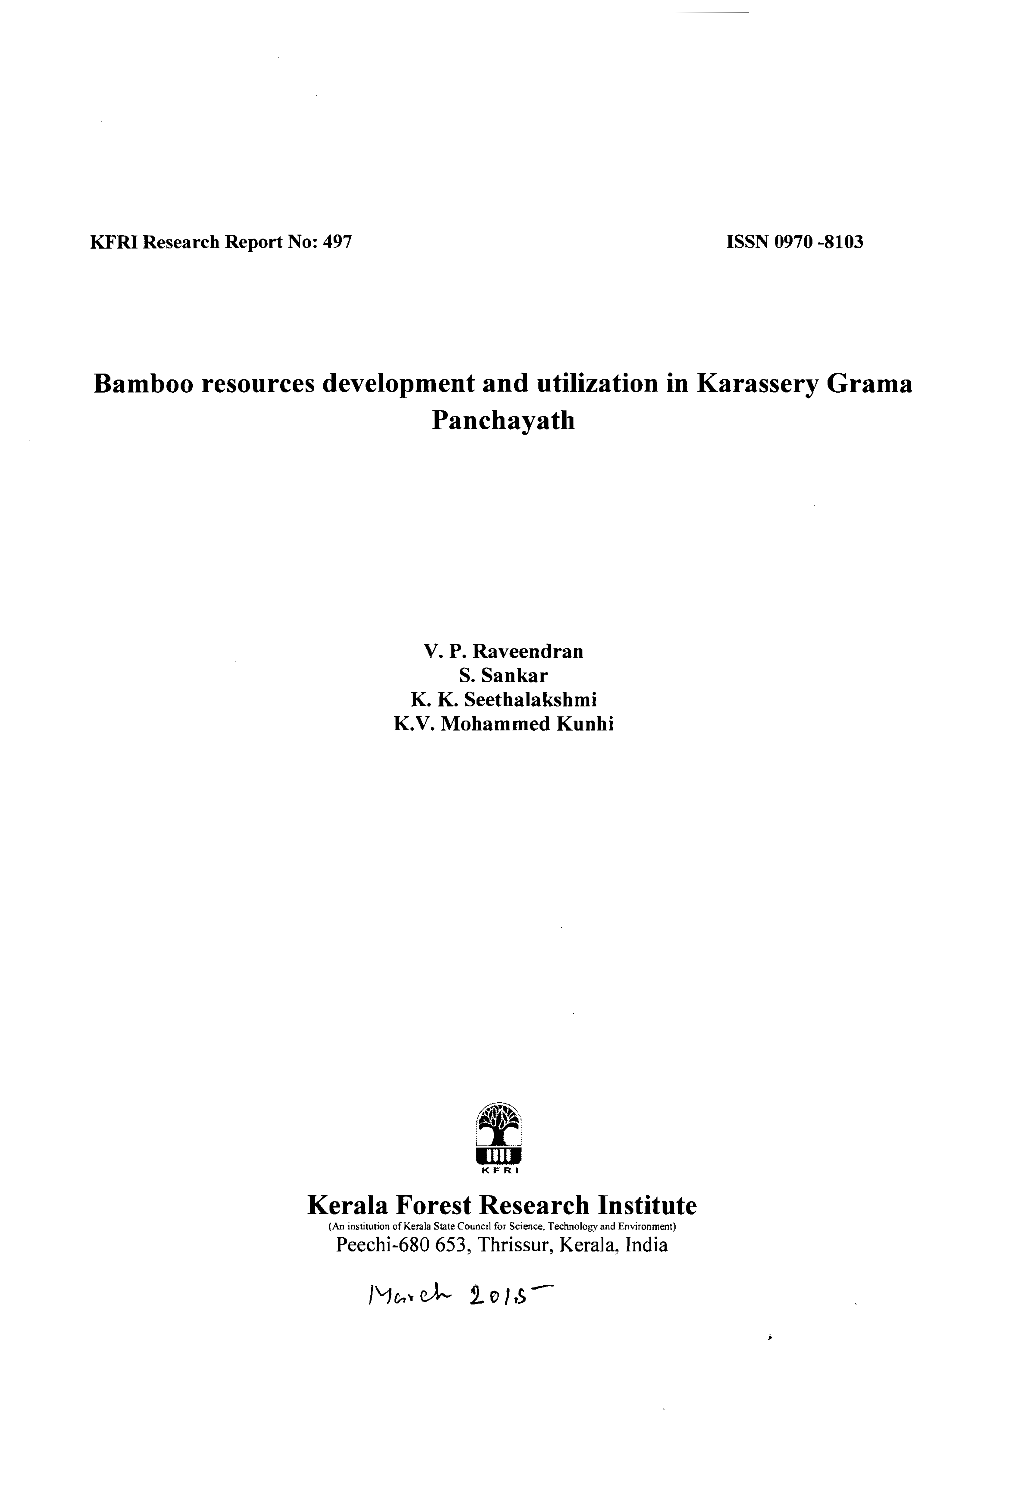 Bamboo Resources Development and Utilization in Karassery Grama Panchayath Kerala Forest Research Institute